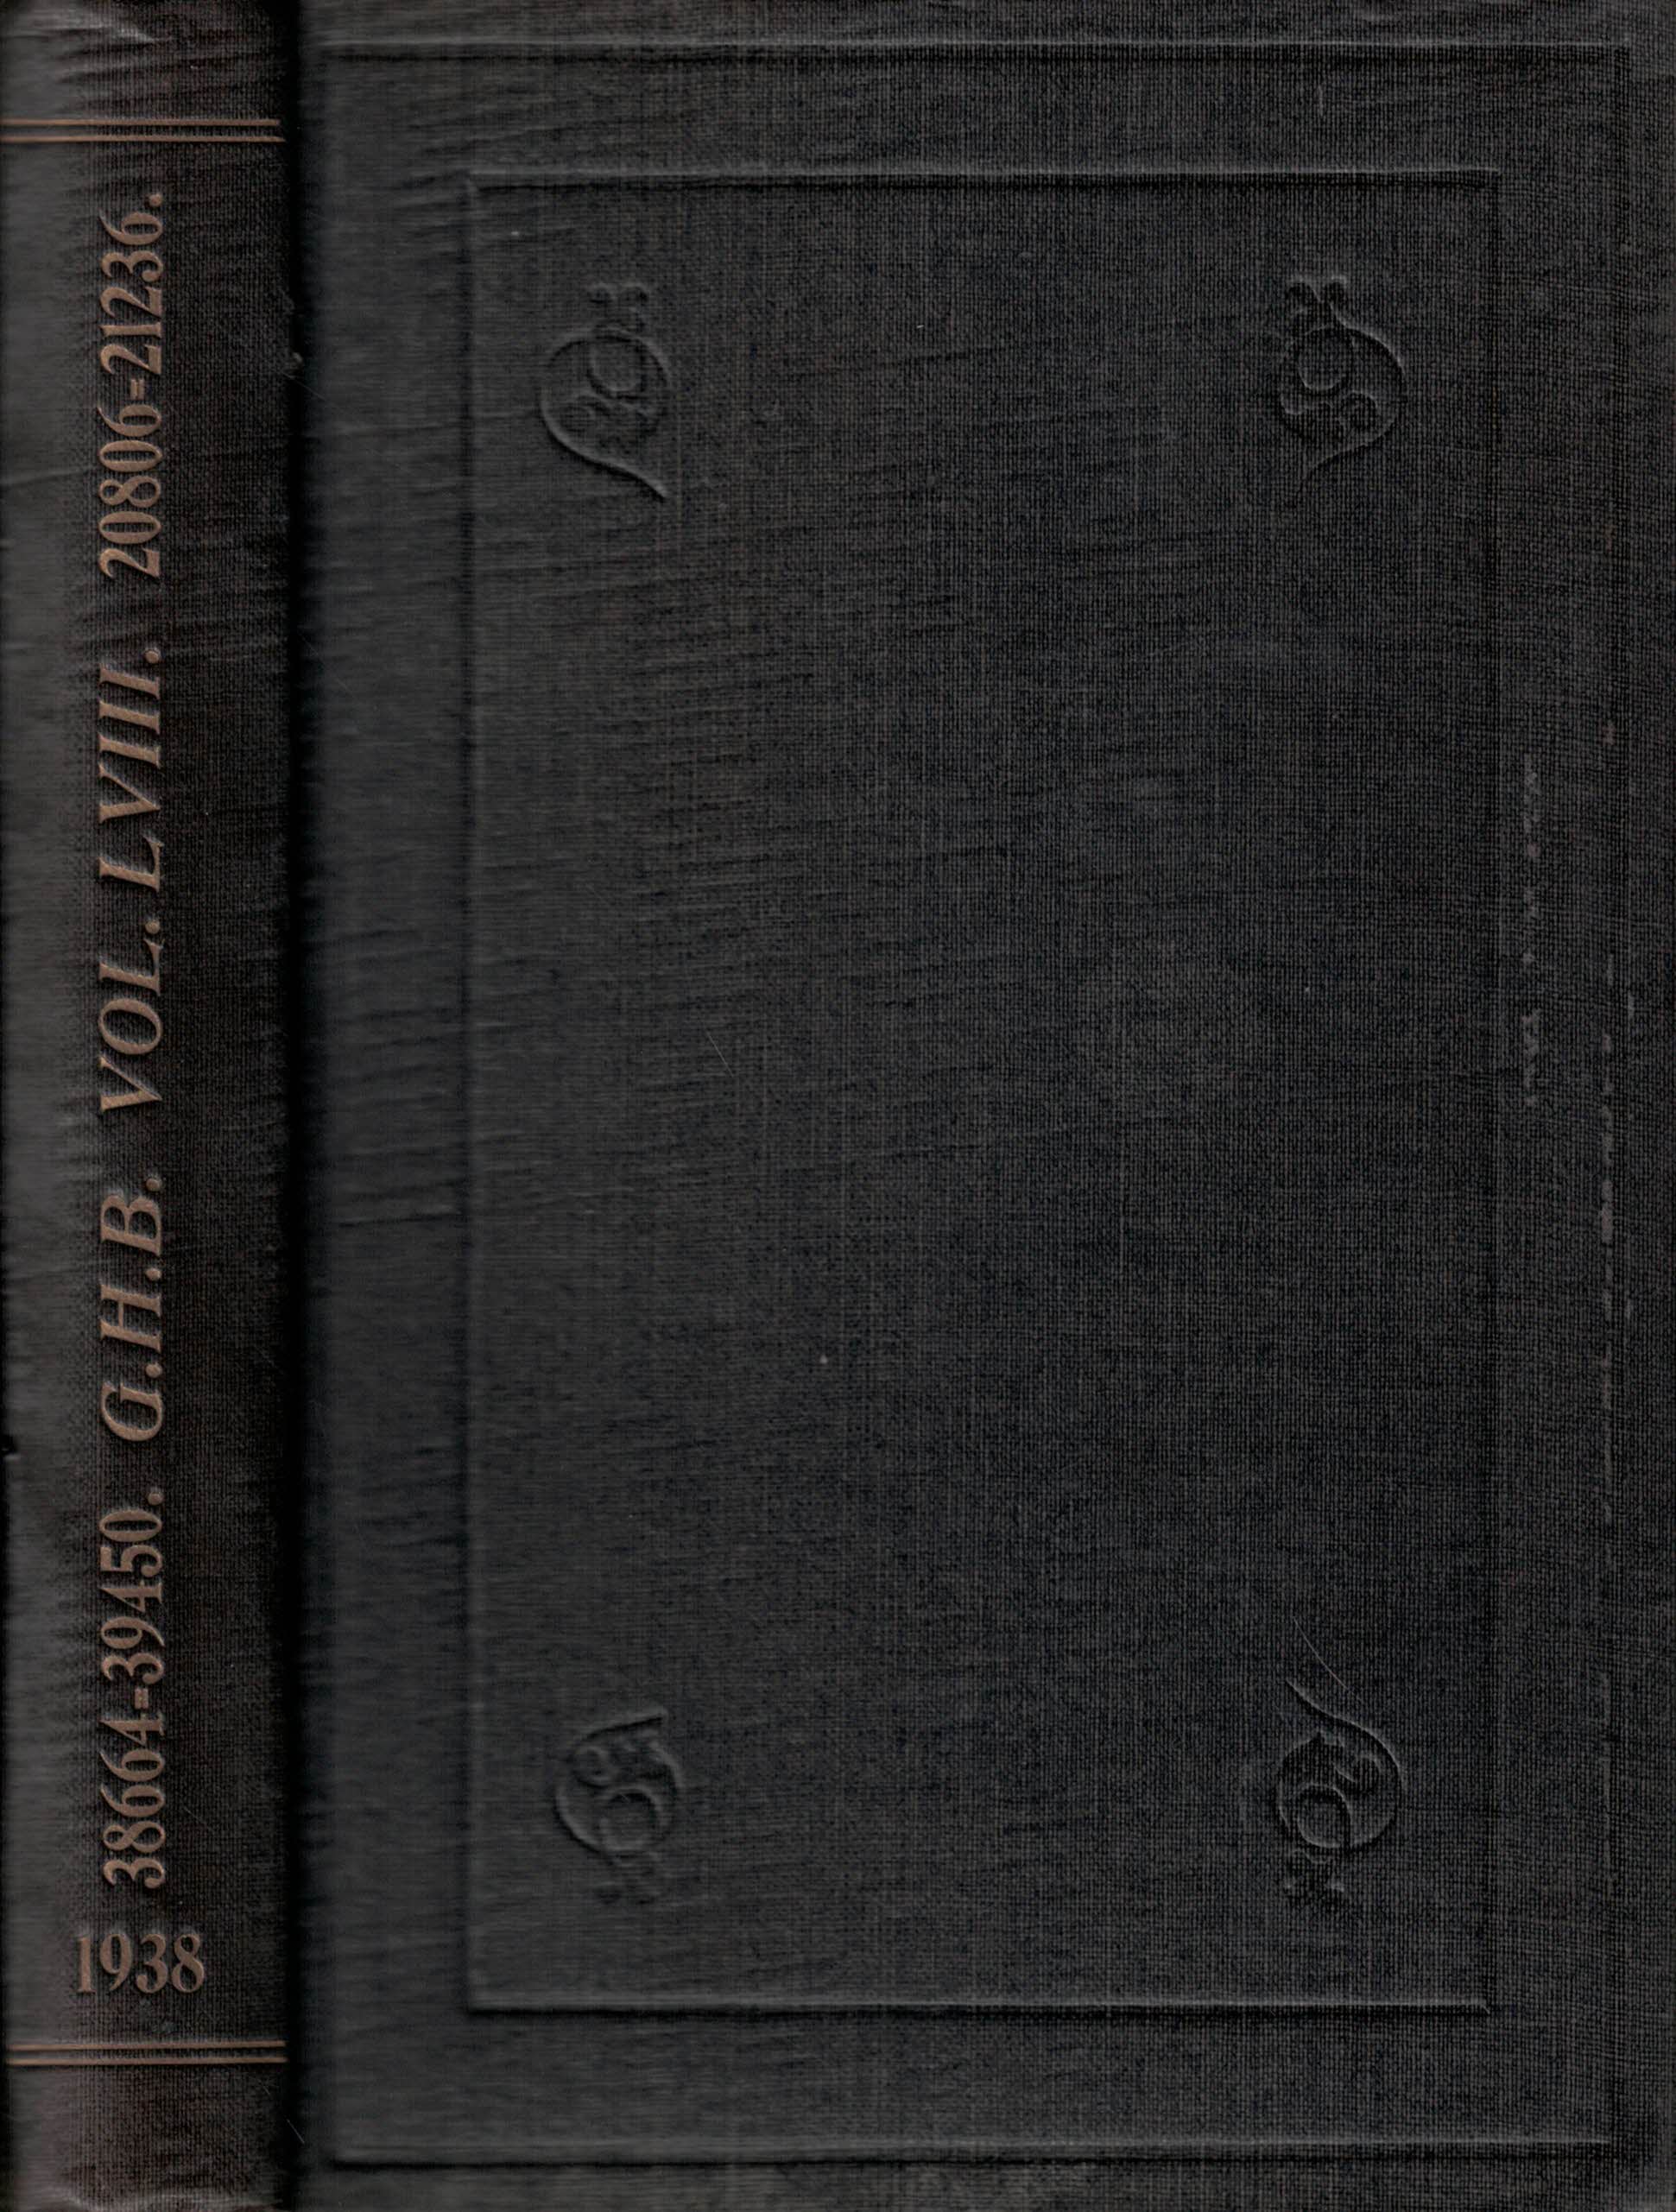 GALLOWAY CATTLE SOCIETY OF GREAT BRITAIN AND IRELAND - The Galloway Herd Book, Containing Pedigrees of Pure-Bred Galloway Cattle. Volume LVIII [58]. 1938